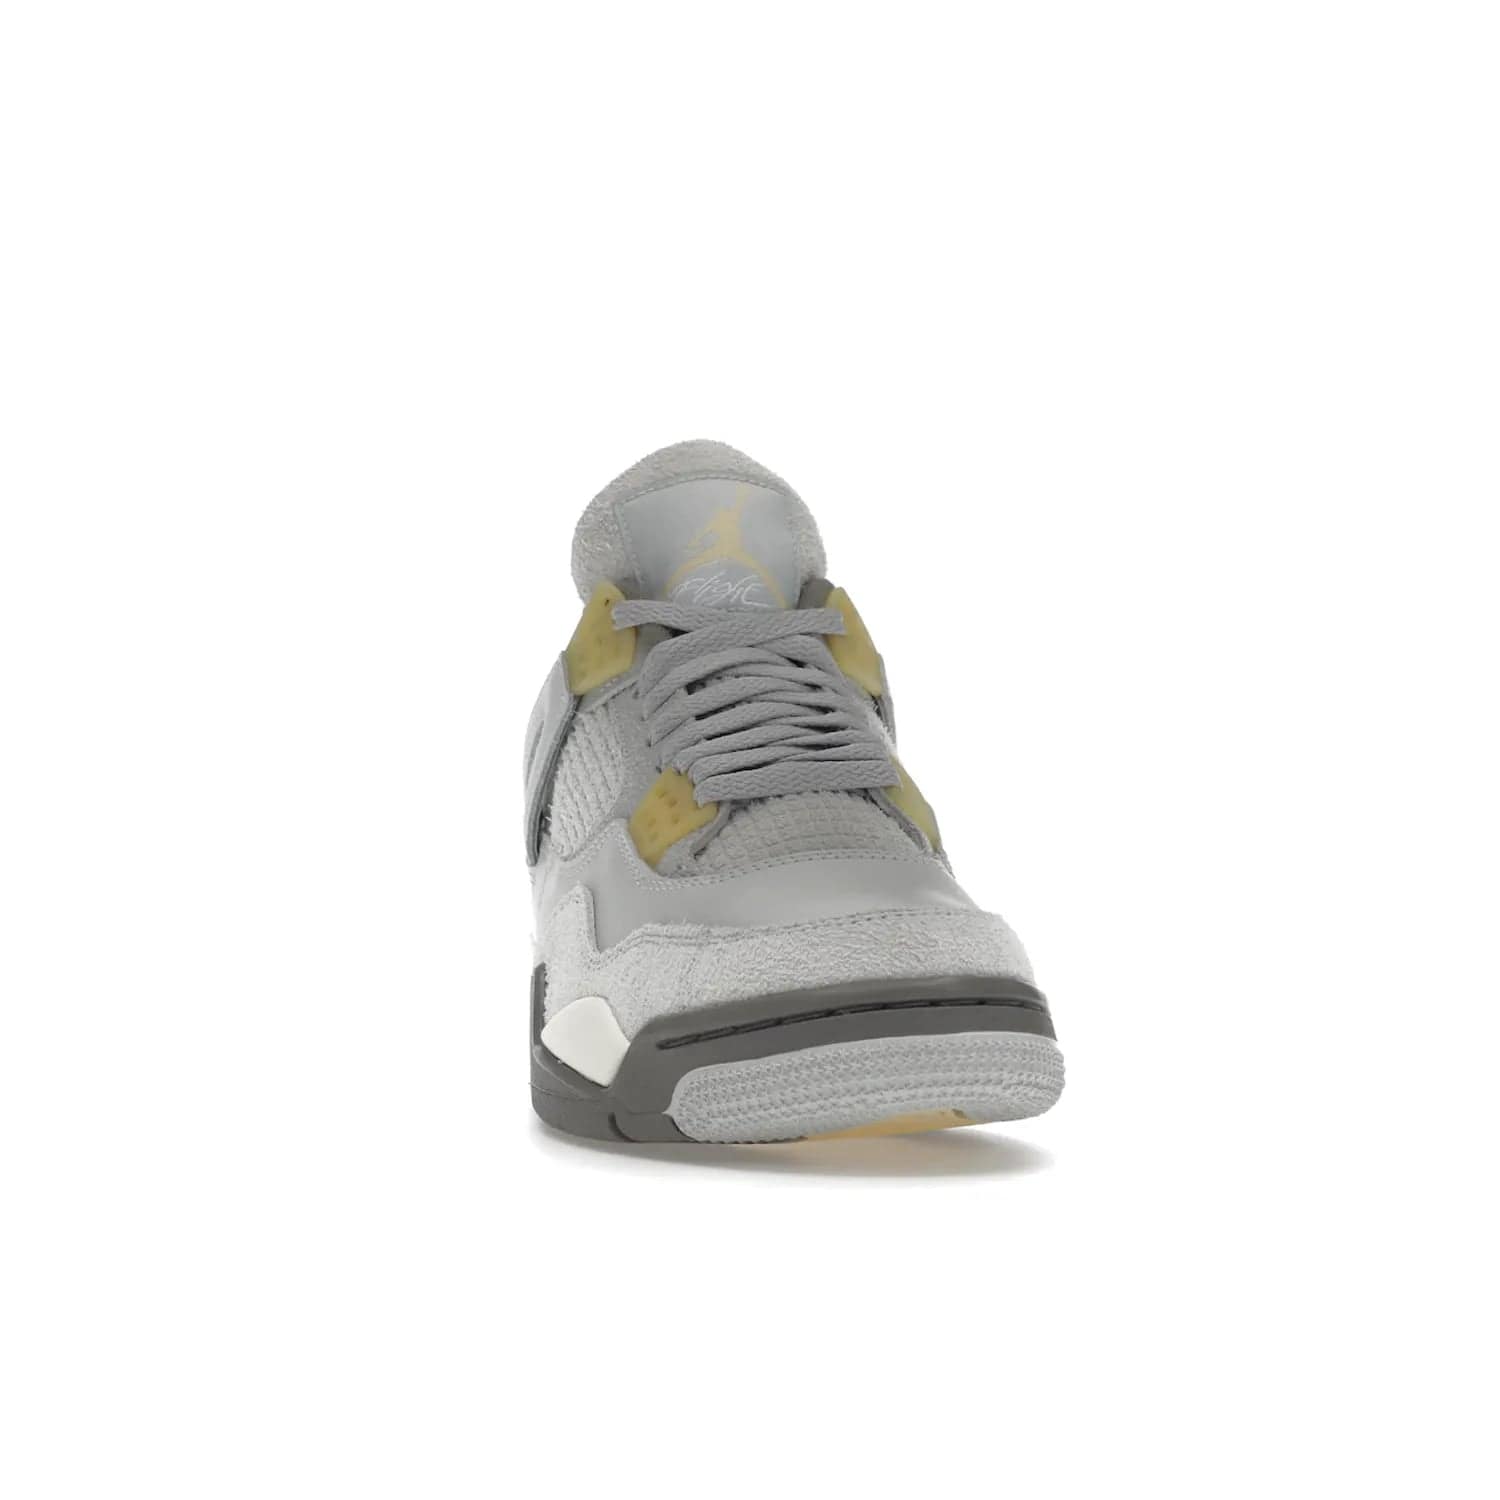 Jordan 4 Retro SE Craft Photon Dust - Image 9 - Only at www.BallersClubKickz.com - Upgrade your shoe collection with the Air Jordan 4 Retro SE Craft Photon Dust. This luxurious sneaker features a combination of suede and leather with unique grey tones like Photon Dust, Pale Vanilla, Off White, Grey Fog, Flat Pewter, and Sail. Available February 11, 2023.